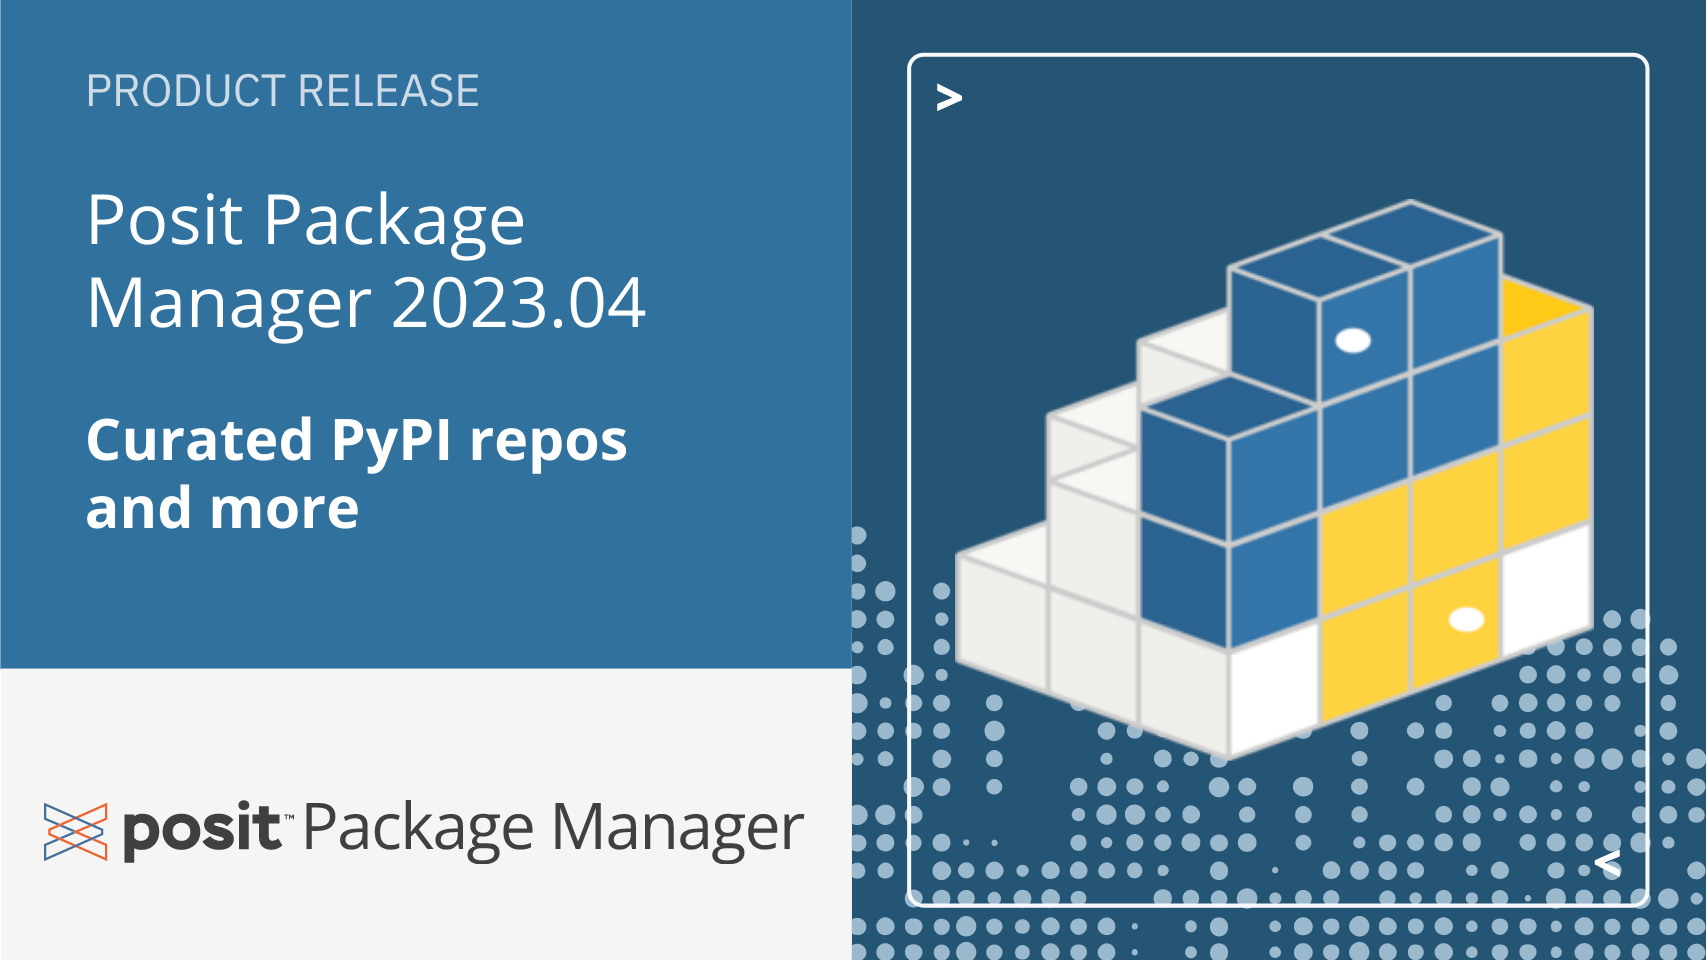 Text: "Product Update. Posit Package Manager 2023.05. What's New". An image of the Posit Package Manager logo and the PyPi repository logo.